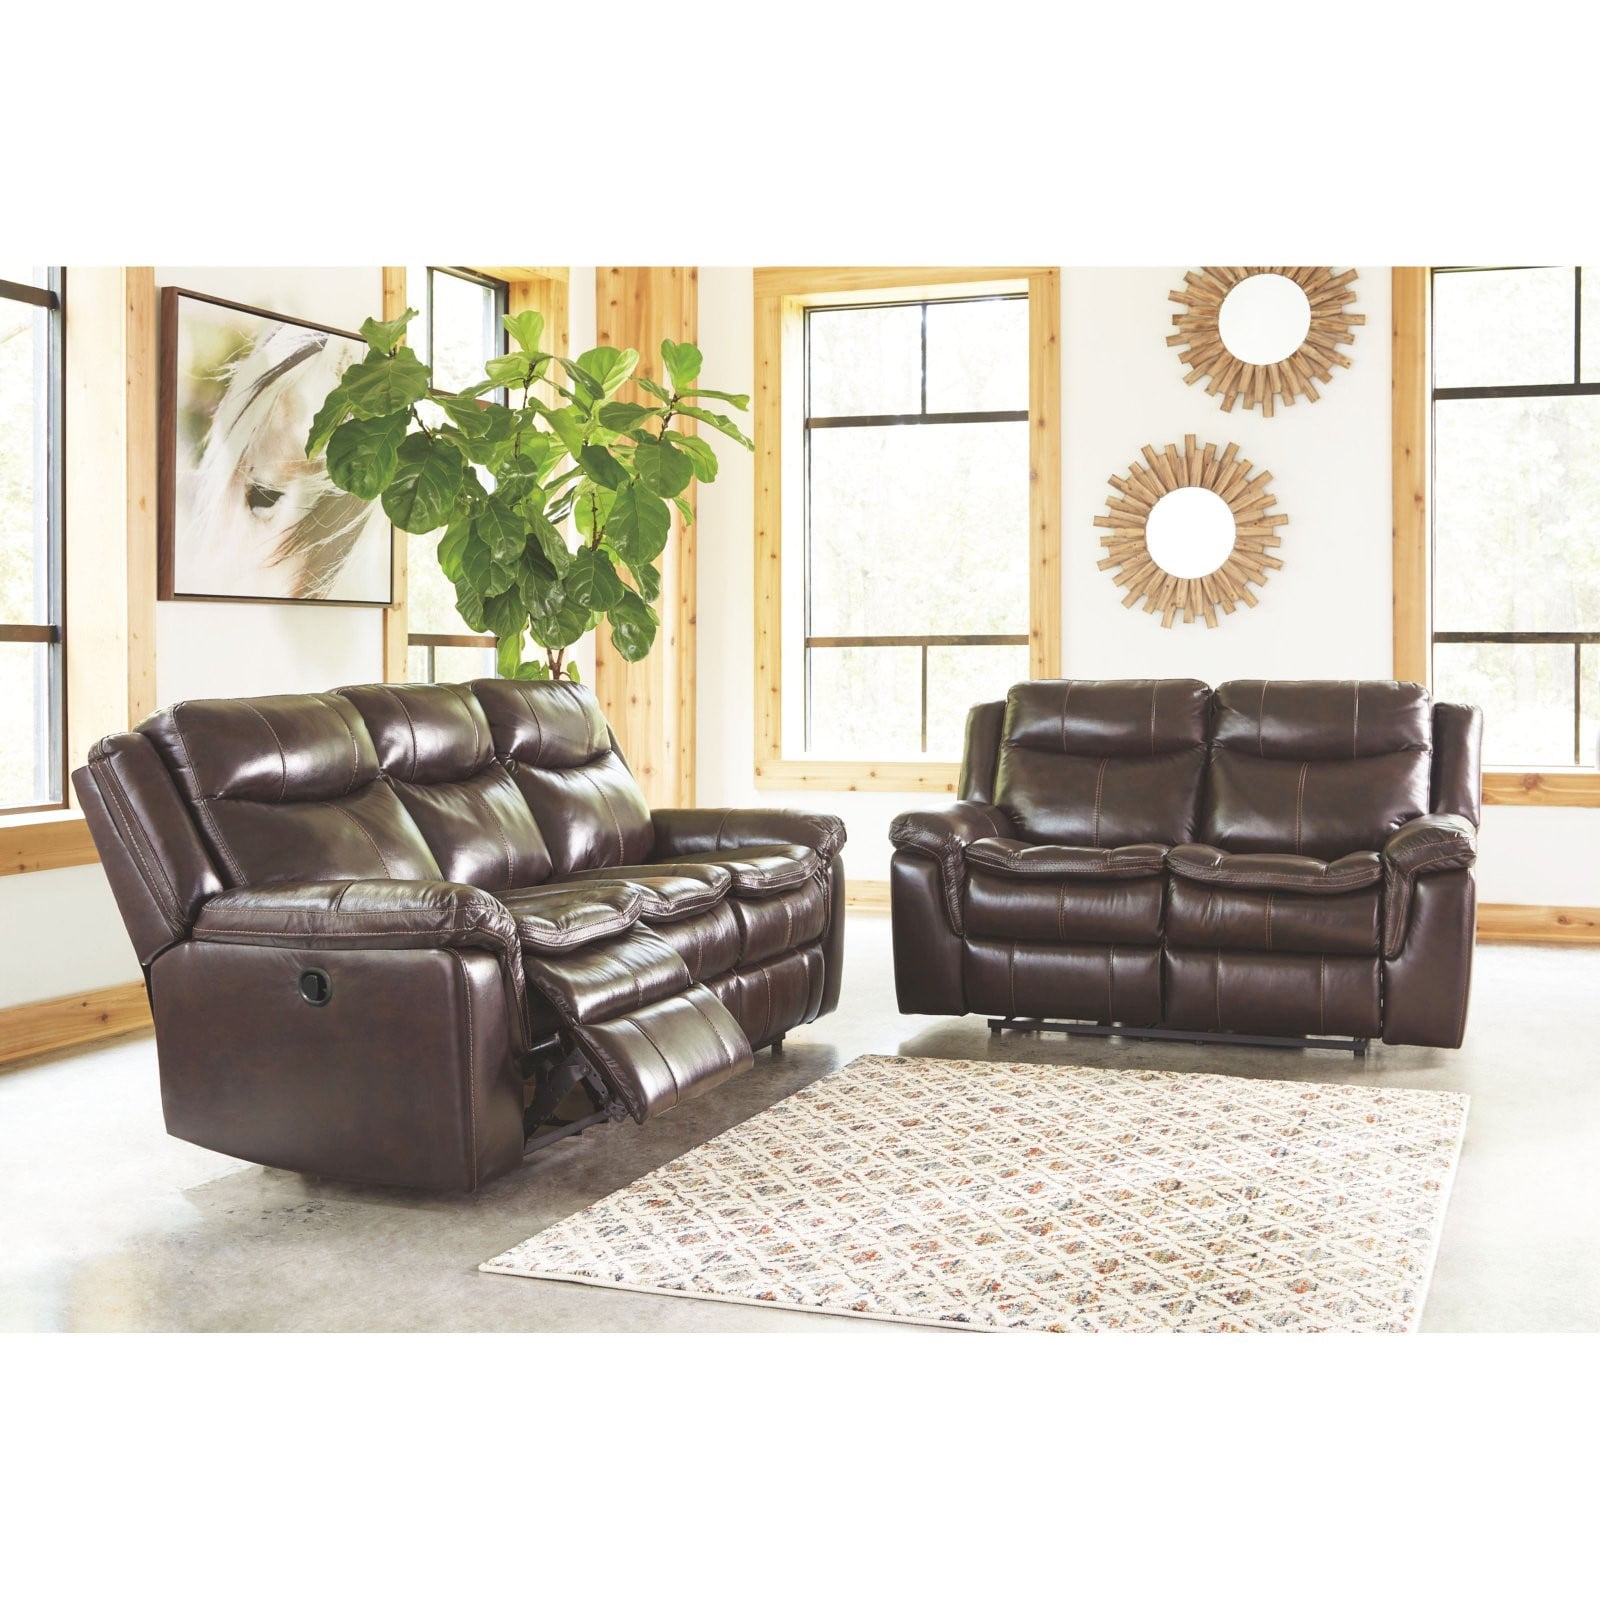 Ashley Furniture Lockesburg Leather Power Reclining Sofa In Canyon Walmart Com Walmart Com,What To Wear At A Funeral Male